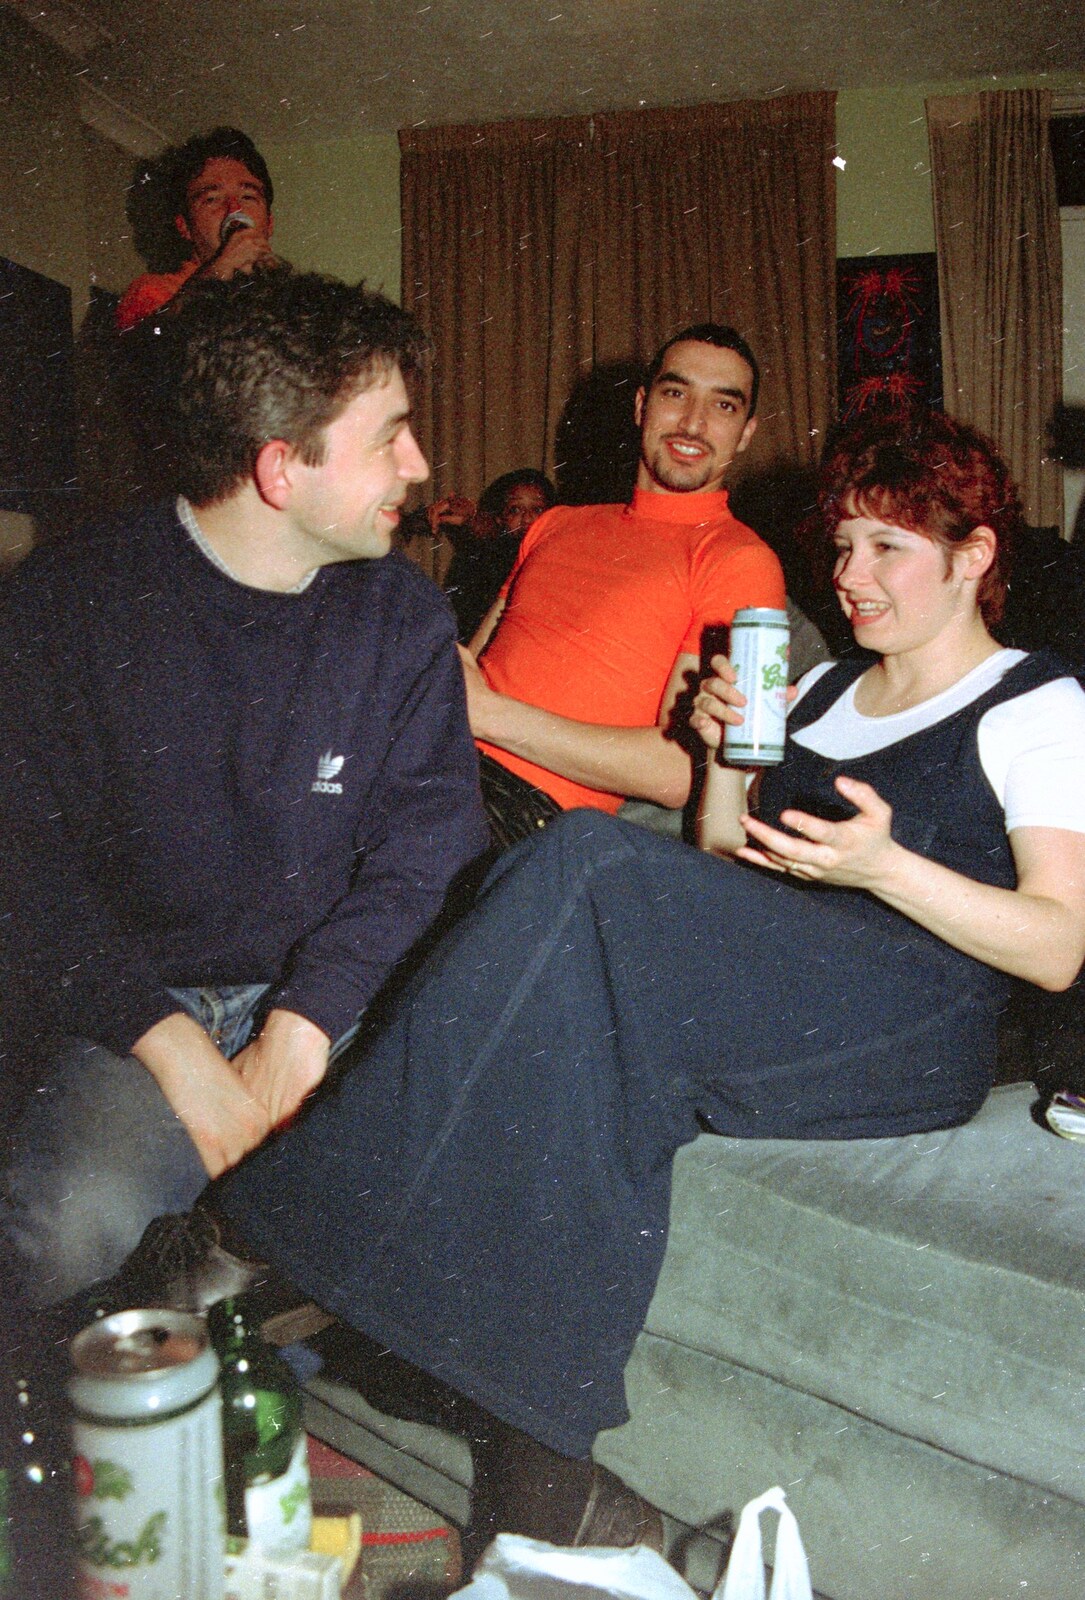 A CISU Party Round Trev's House, Cavendish Street, Ipswich - 17th May 1997: Neil, Orhan and Lisa